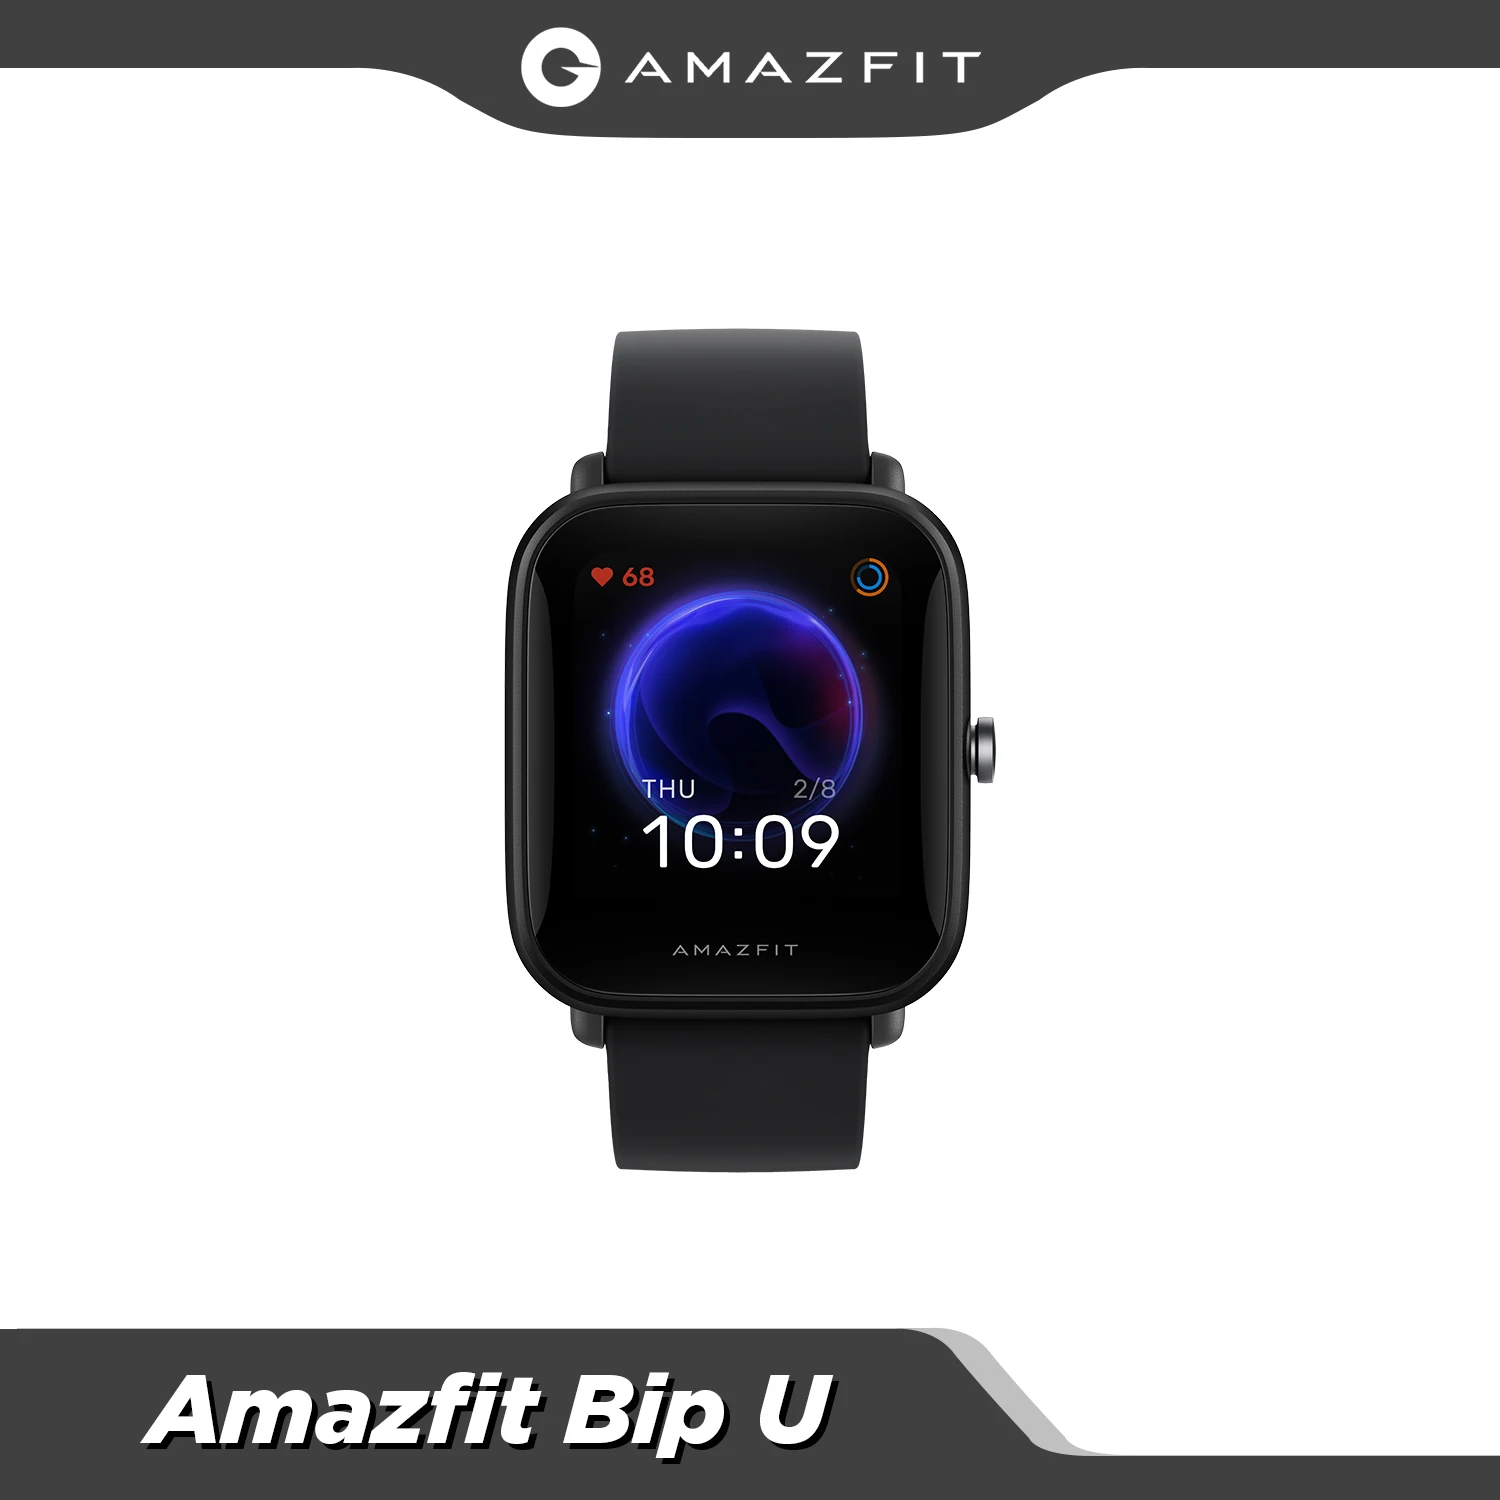 Original Amazfit Bip U Fitness Track Smartwatch 5ATM Waterproof Color Display Sleep Monitoring for Android for IOS